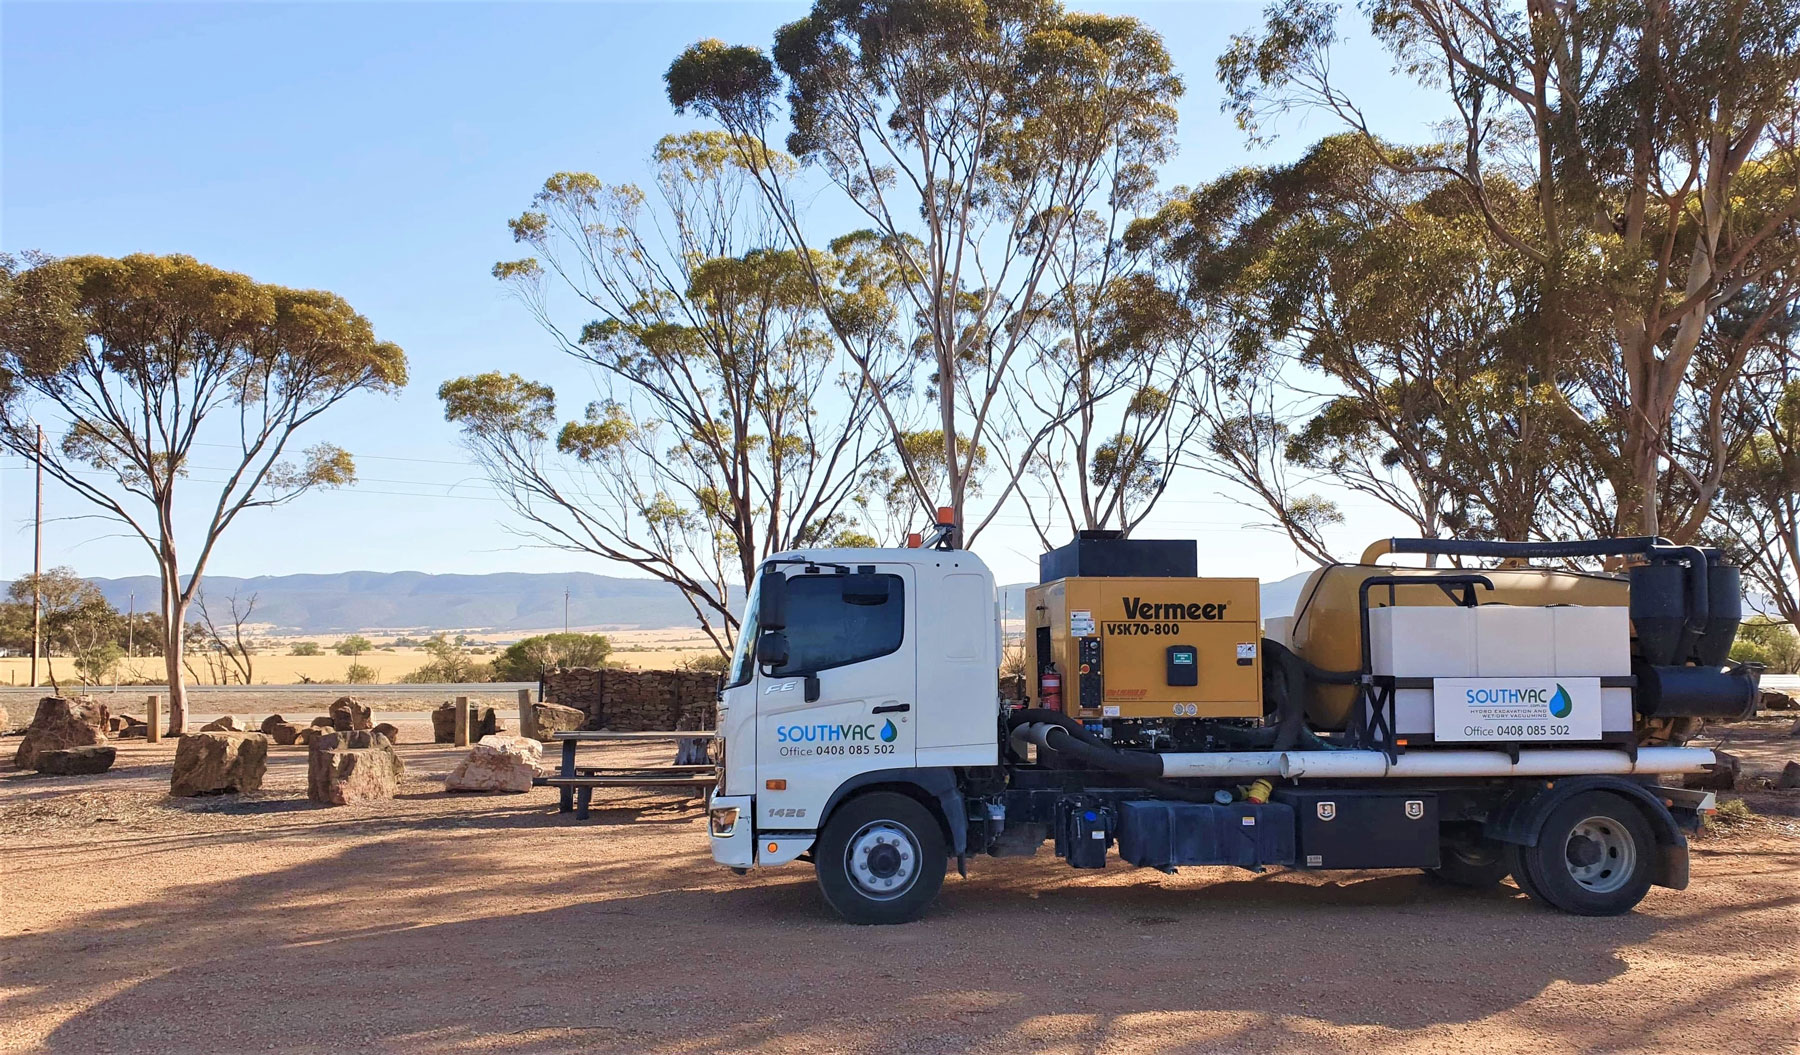 Hydro excavation truck called South Vac 2 parked in front of a view of the Flinders Ranges